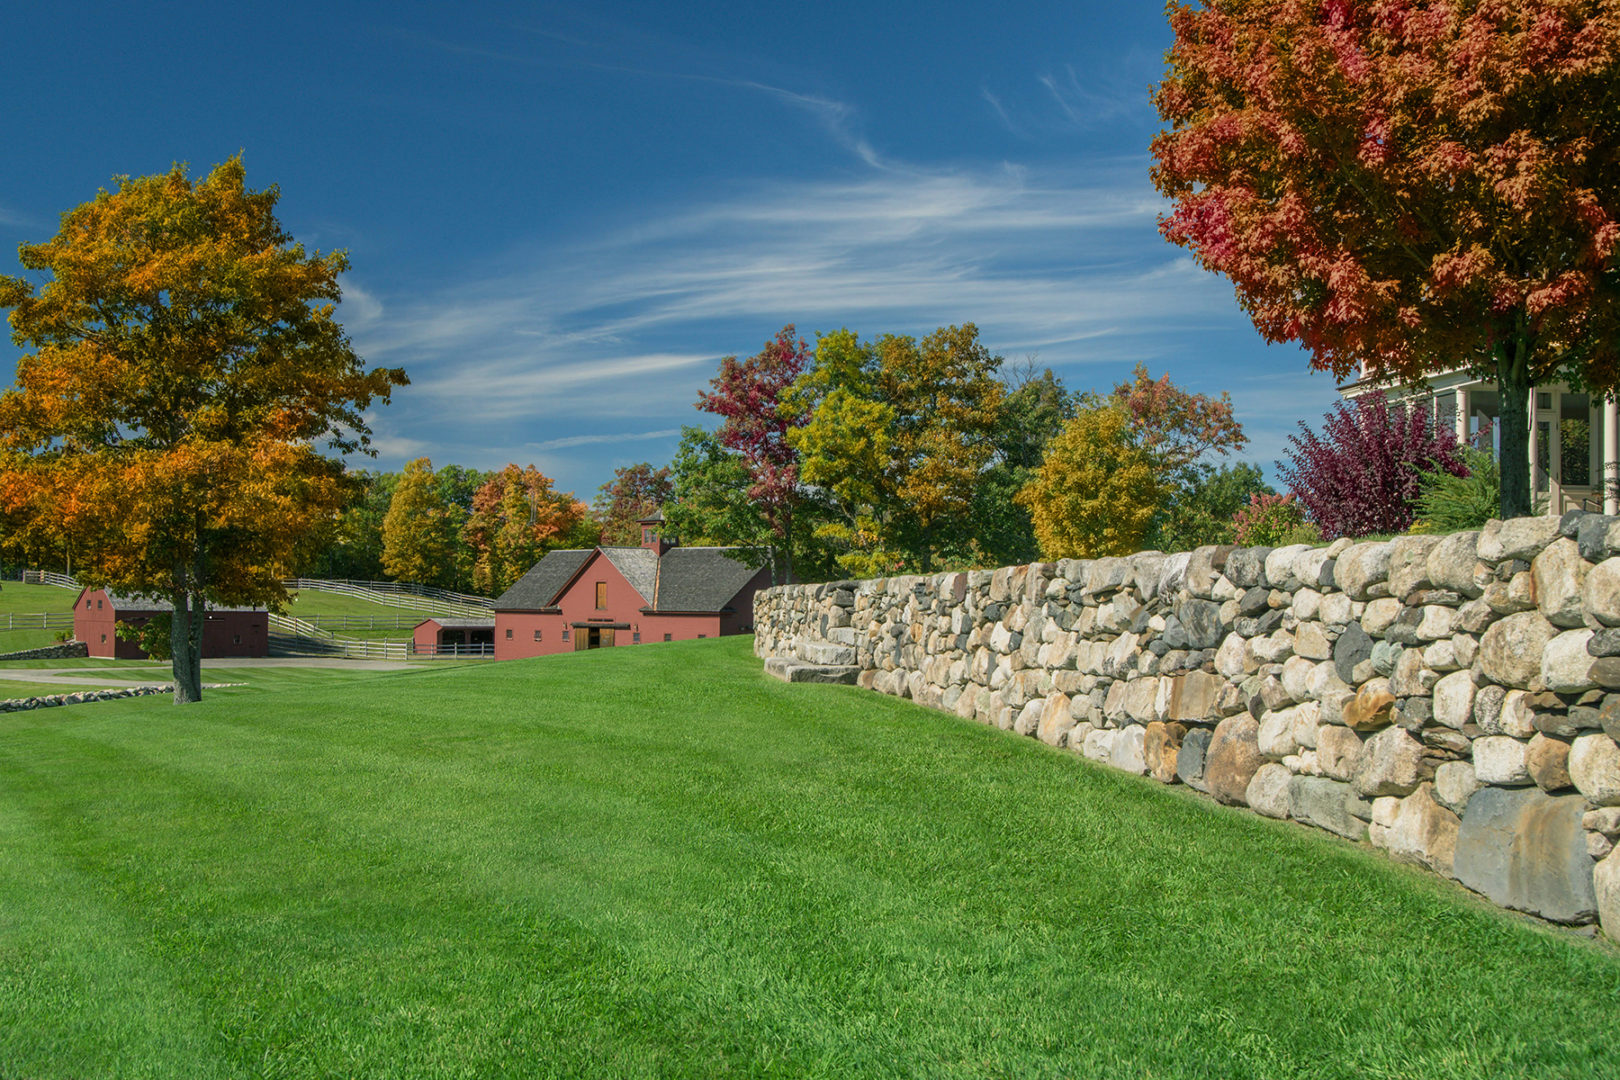 Healthy green grass lawn bordered by fall trees, a stonewall and red barn and outbuildings.